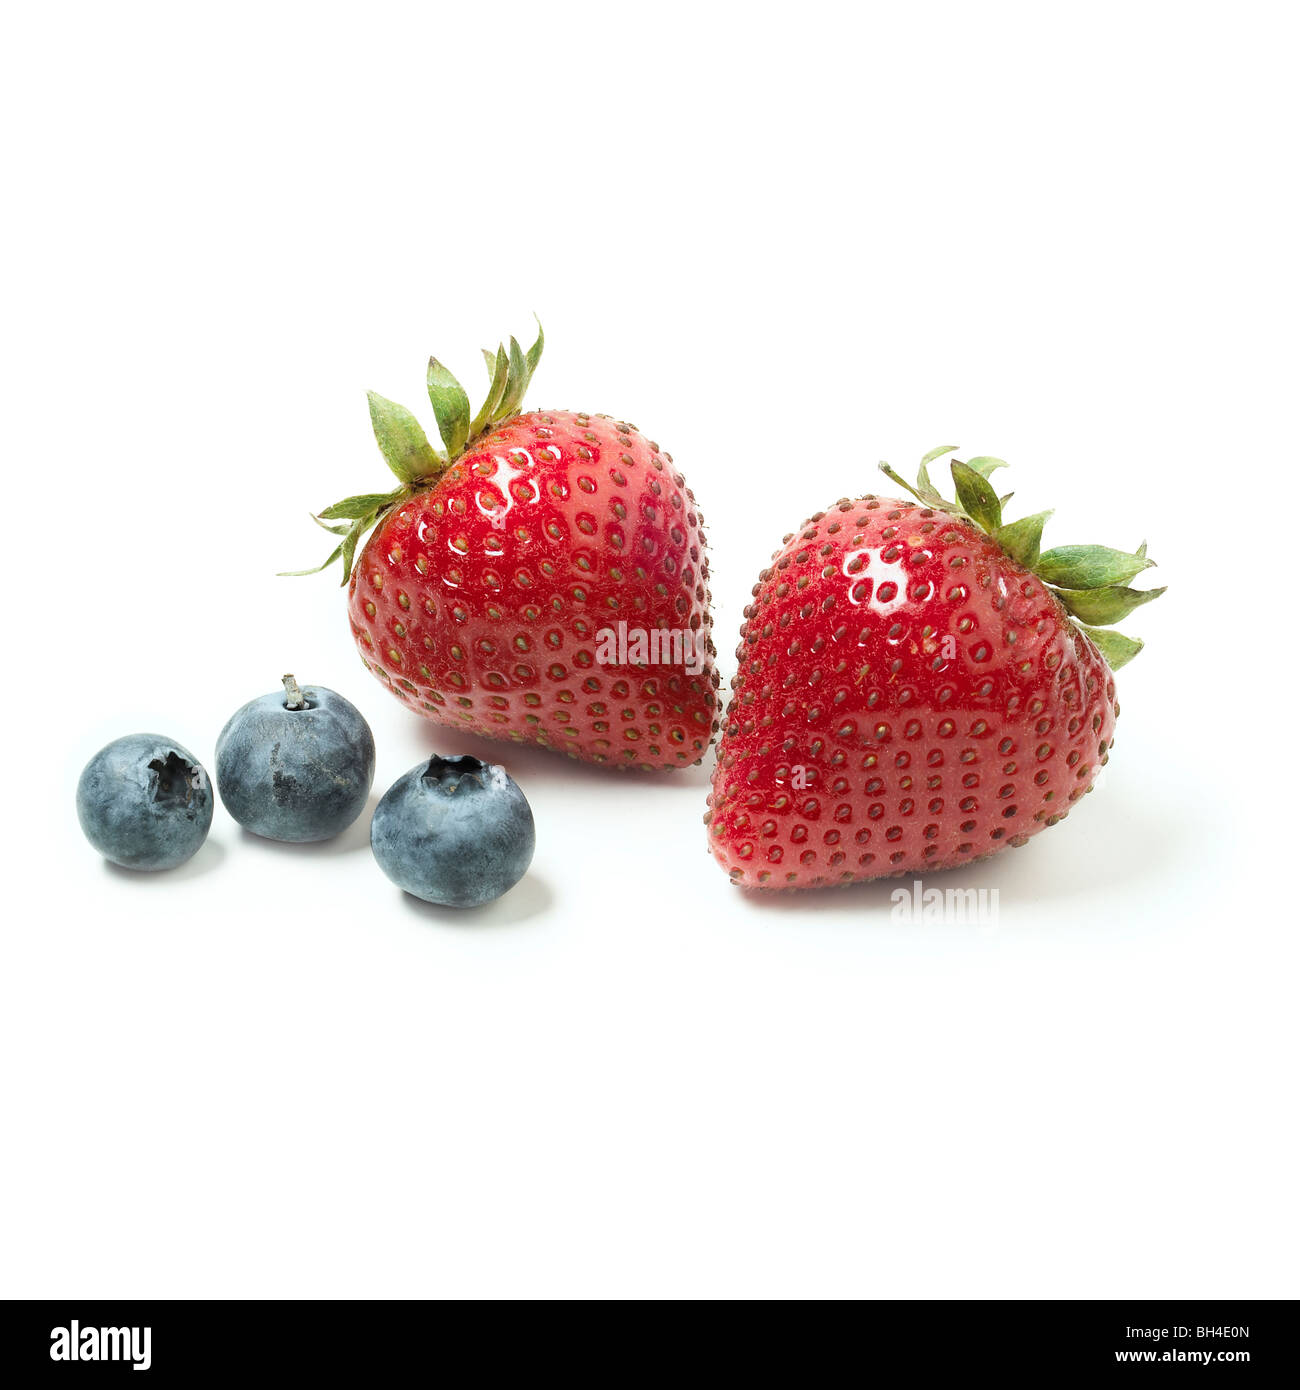 Blueberries and a strawberry on a white background Stock Photo